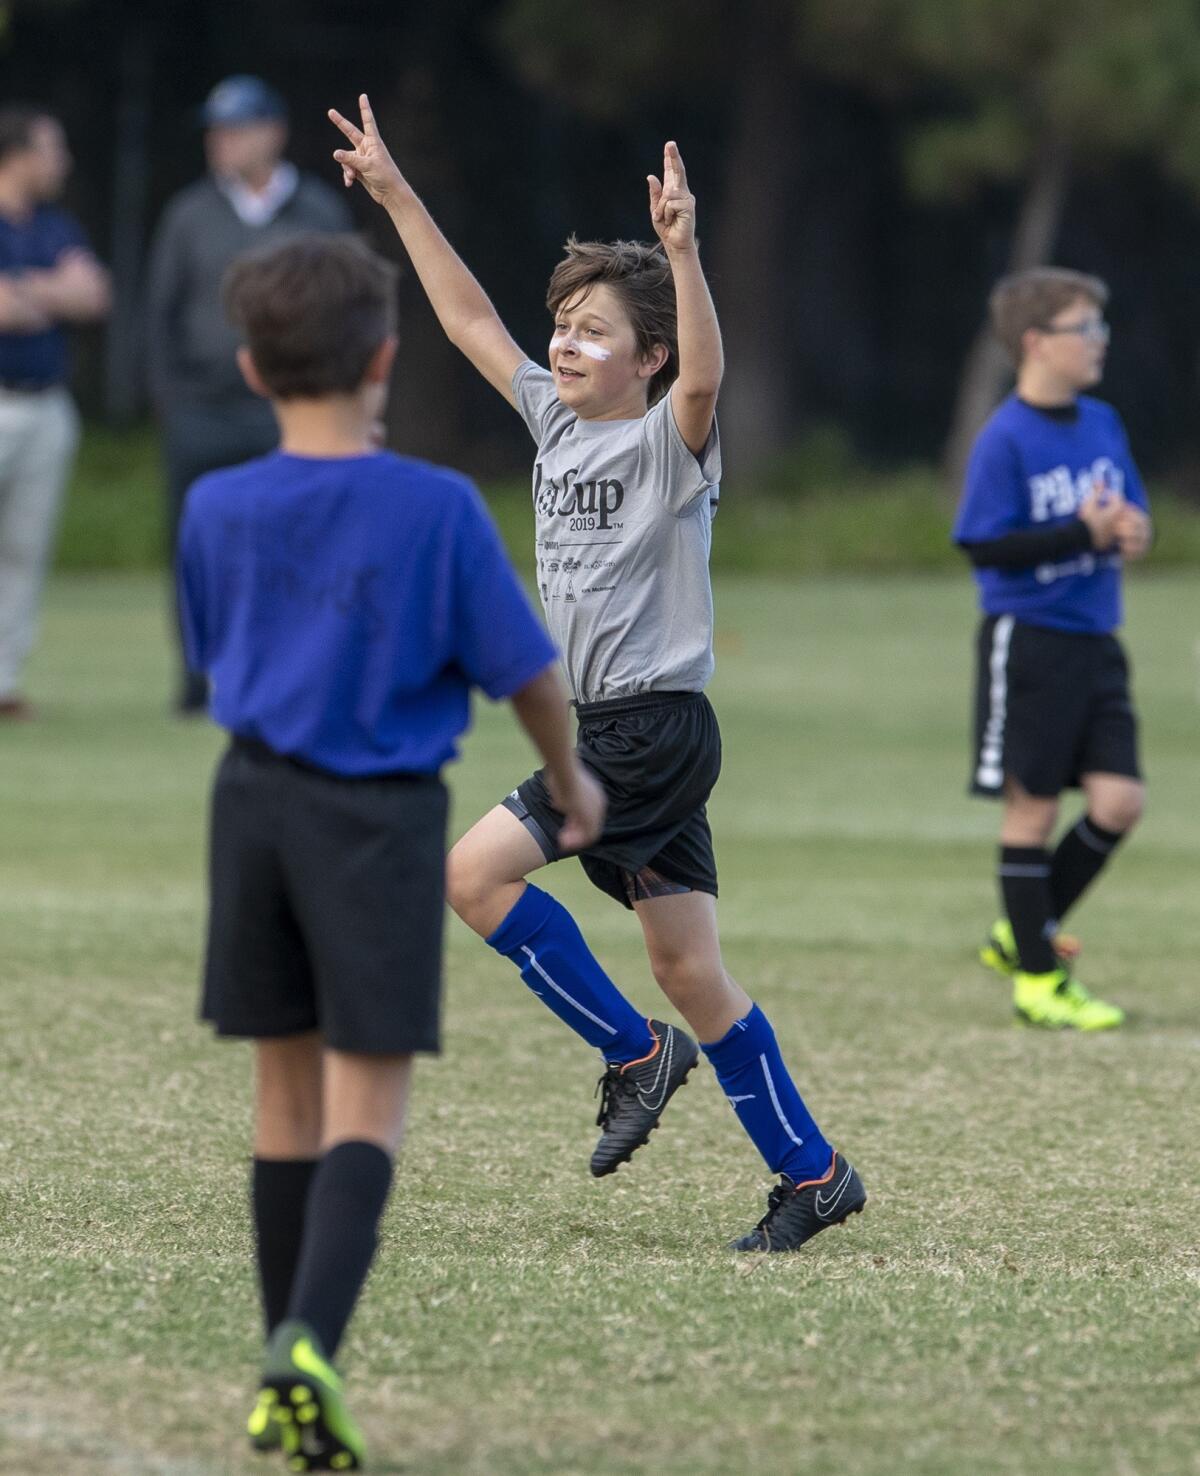 Our Lady Queen of Angels Catholic School's Travis Reedy celebrates after scoring a goal against Carden Hall in a boys' third- and fourth-grade Silver Division pool-play match at the Daily Pilot Cup on Thursday.